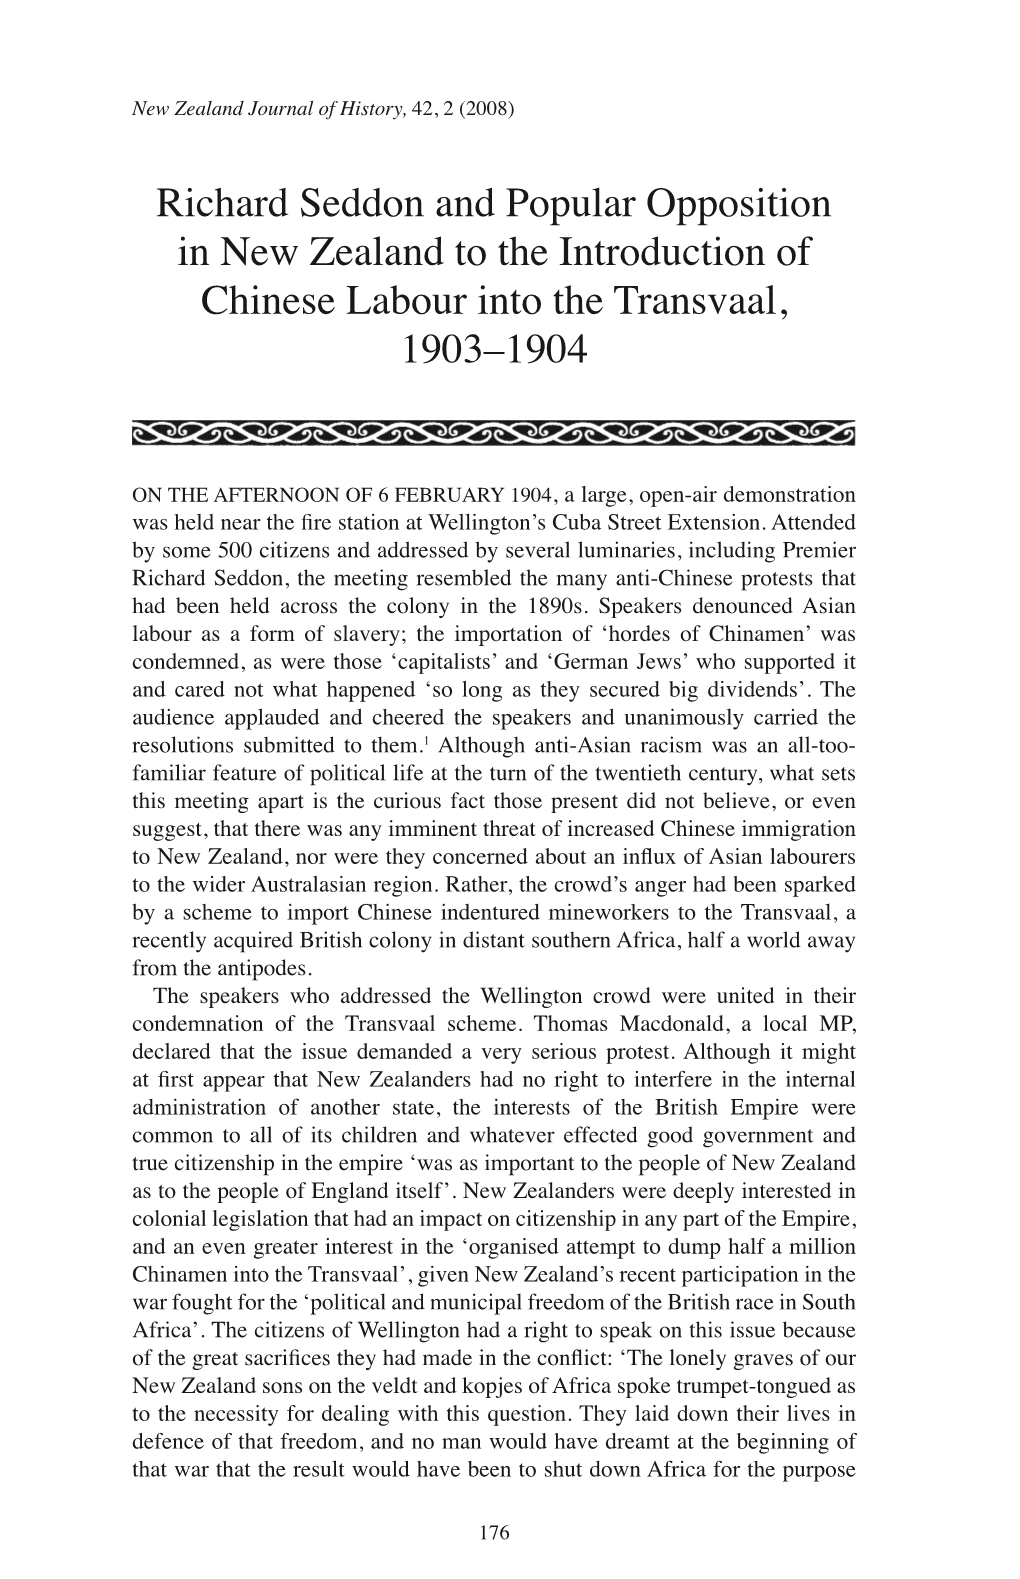 Richard Seddon and Popular Opposition in New Zealand to the Introduction of Chinese Labour Into the Transvaal, 1903–1904